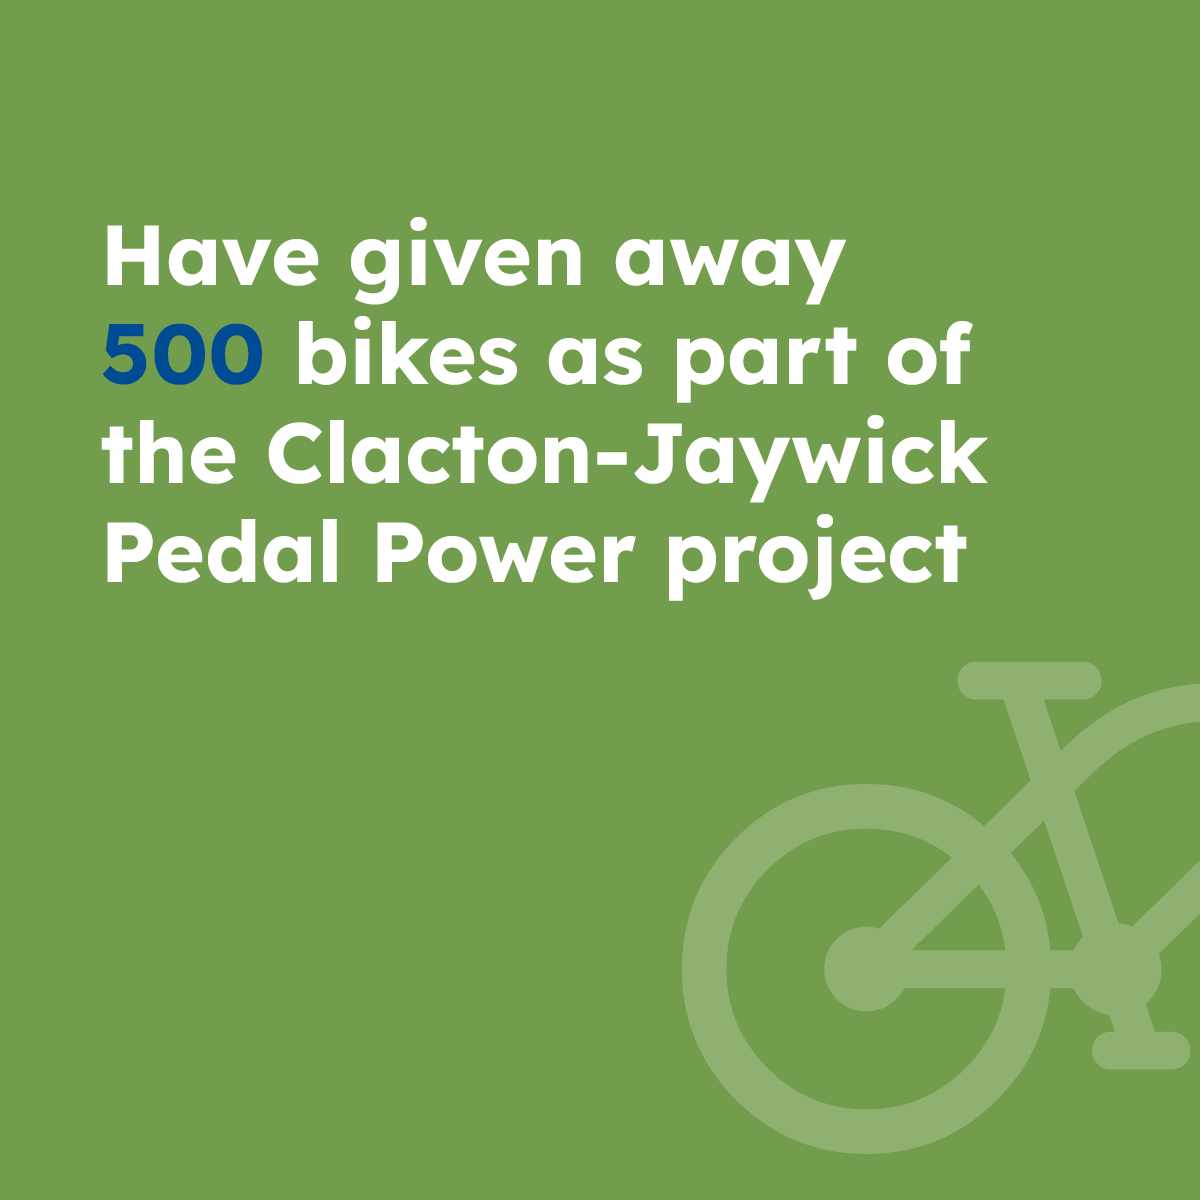 Have given away 500 bikes a part of the Clacton-Jaywick Pedal Power project